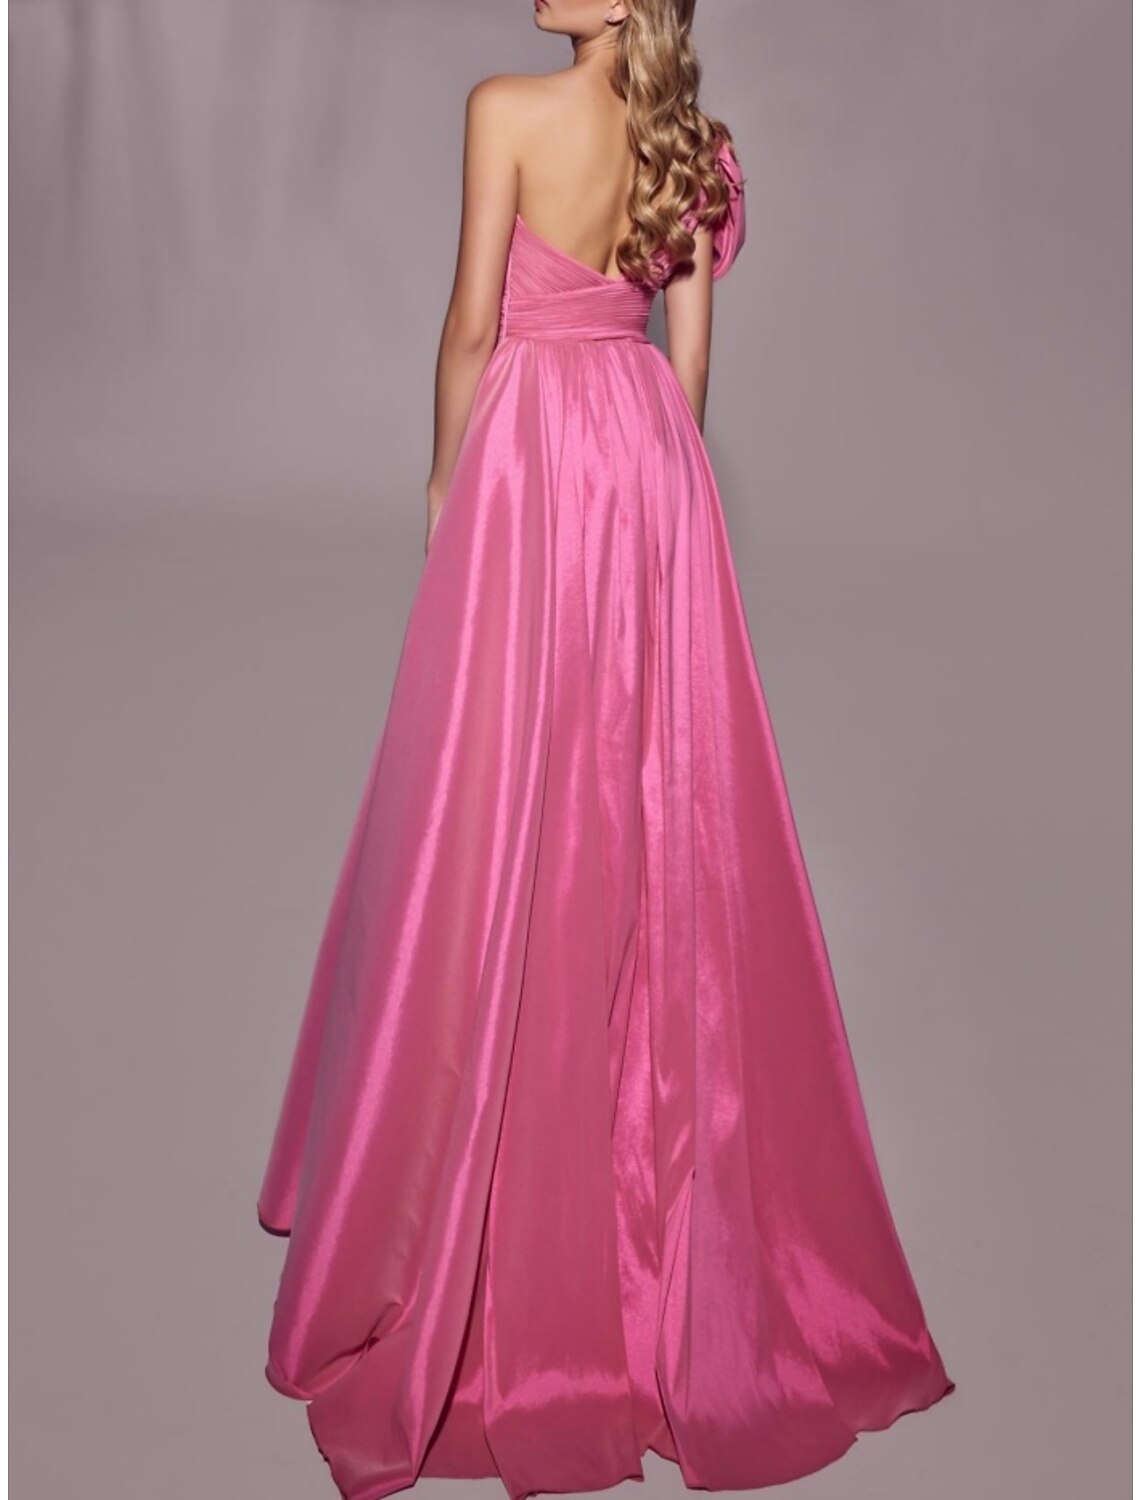 A-Line Evening Gown Elegant Dress Formal Sweep / Brush Train Short Sleeve One Shoulder Satin with Pleats Ruched Slit